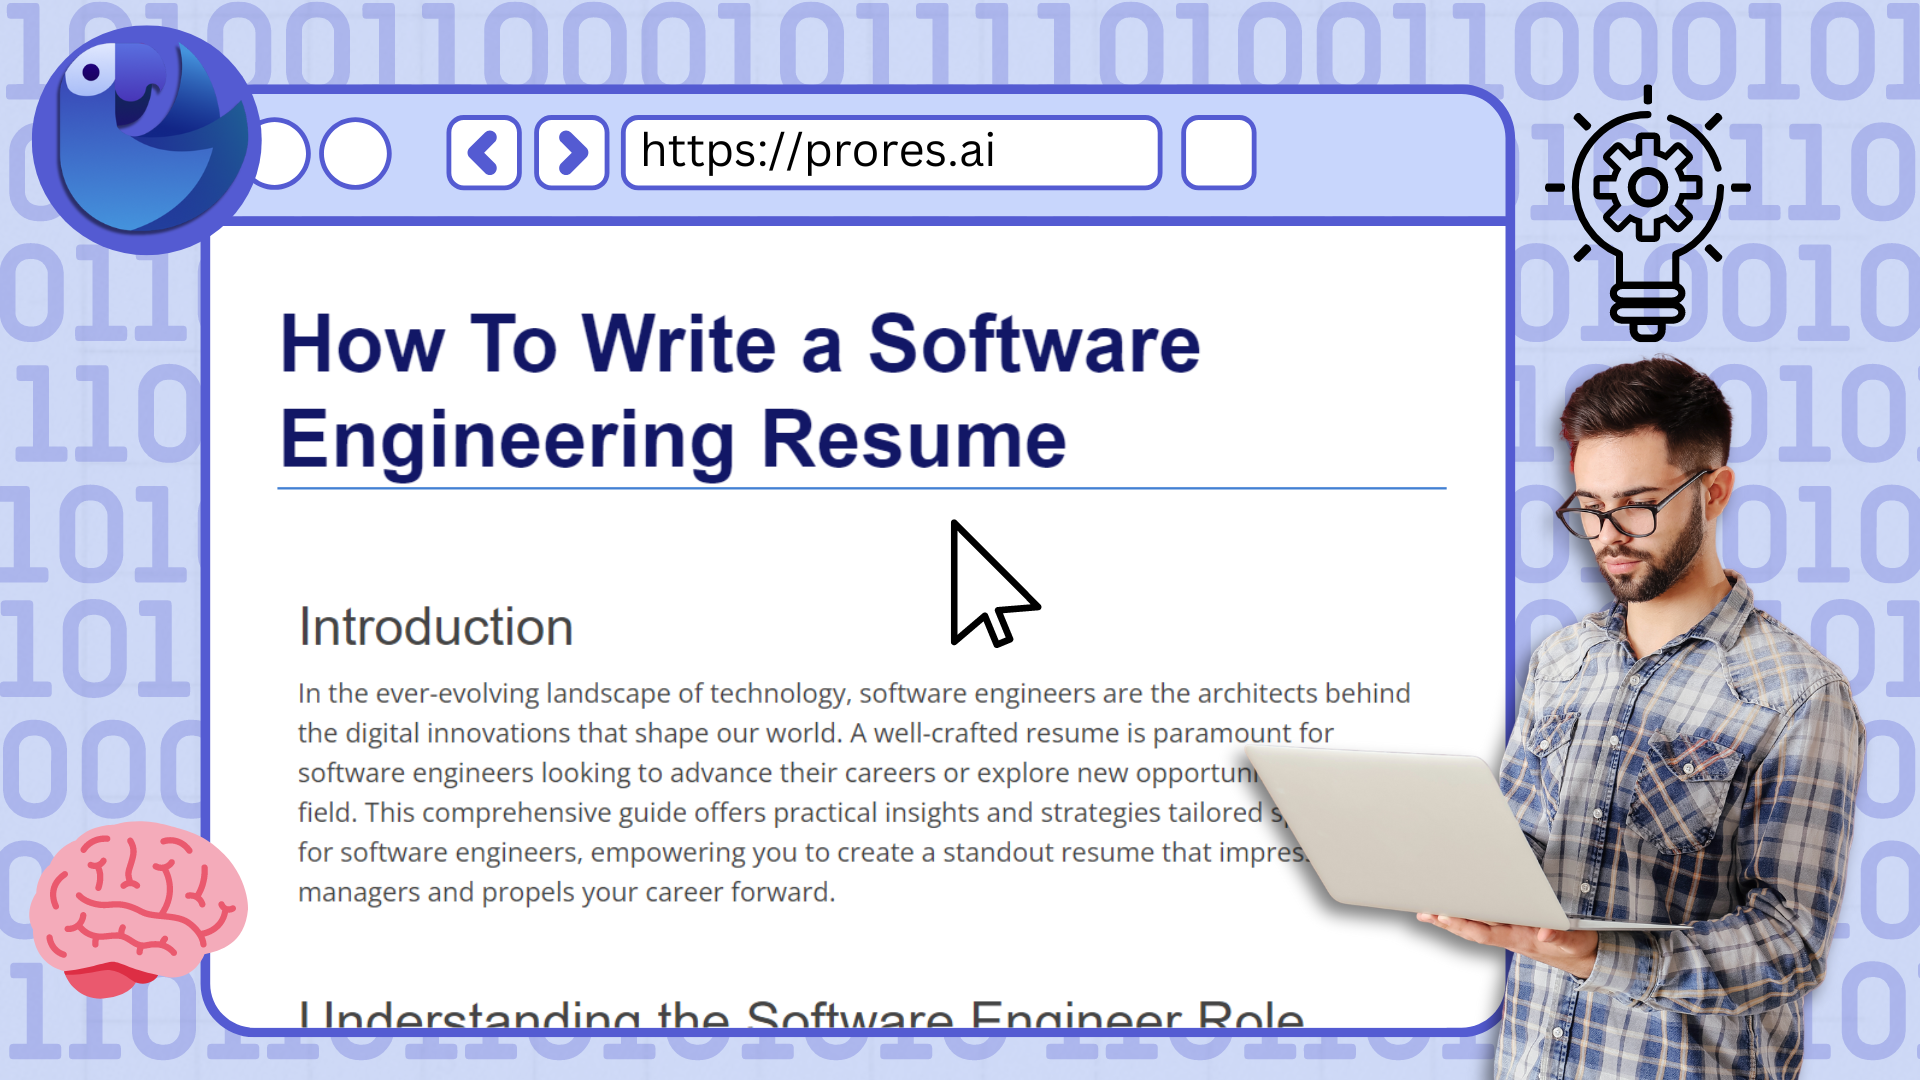 How To Write a Software Engineering Resume: Build Your Future, Build the Future featured image